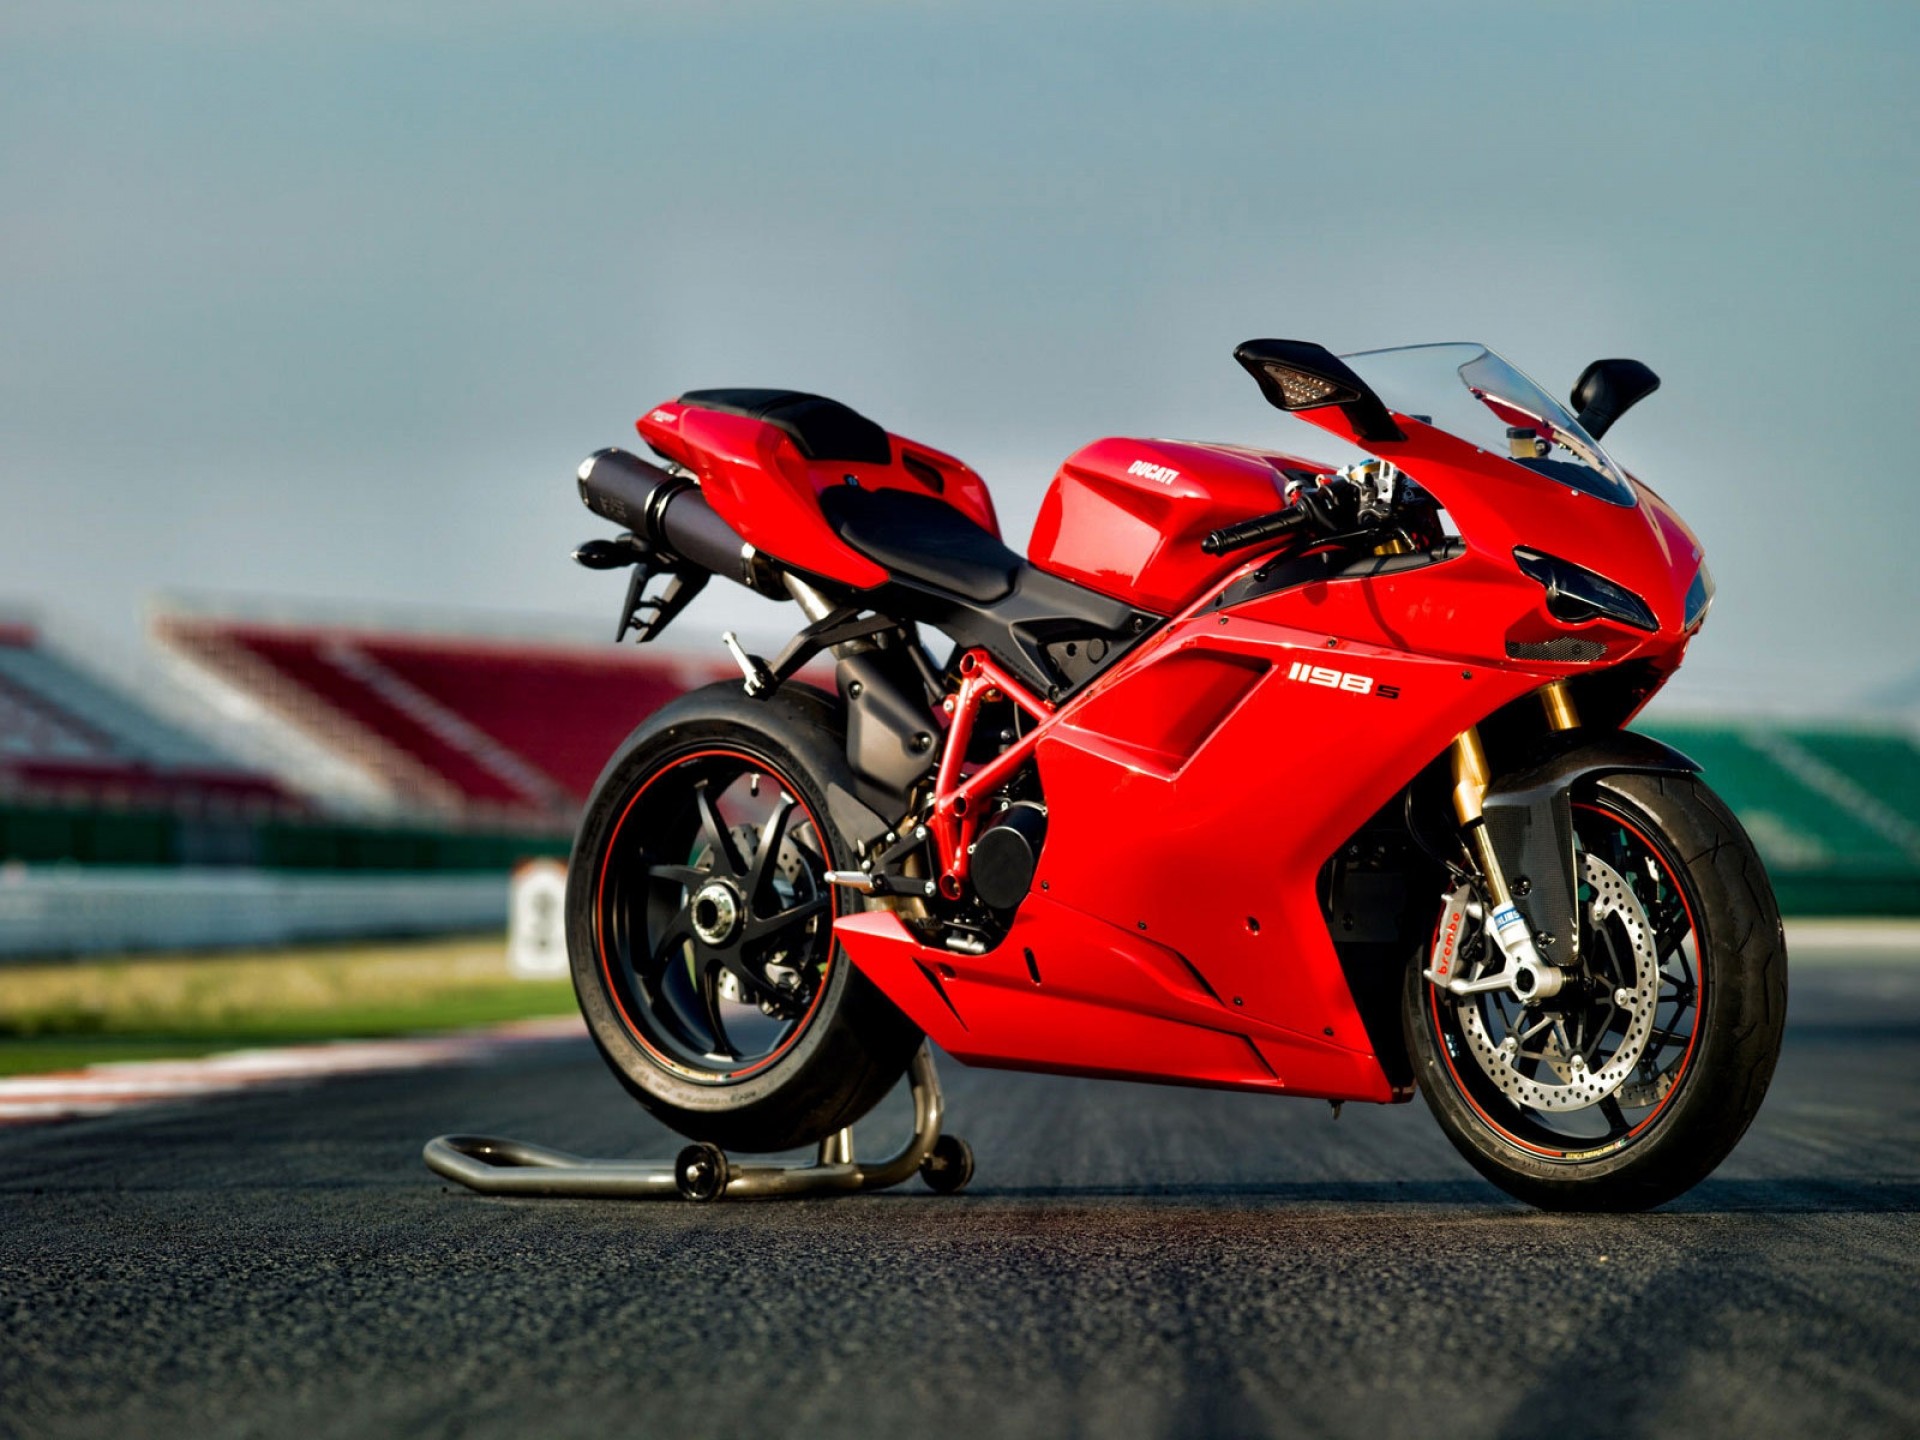 1920x1440 Ducati Superbike Panigale S Wallpaper Motorcycles HD